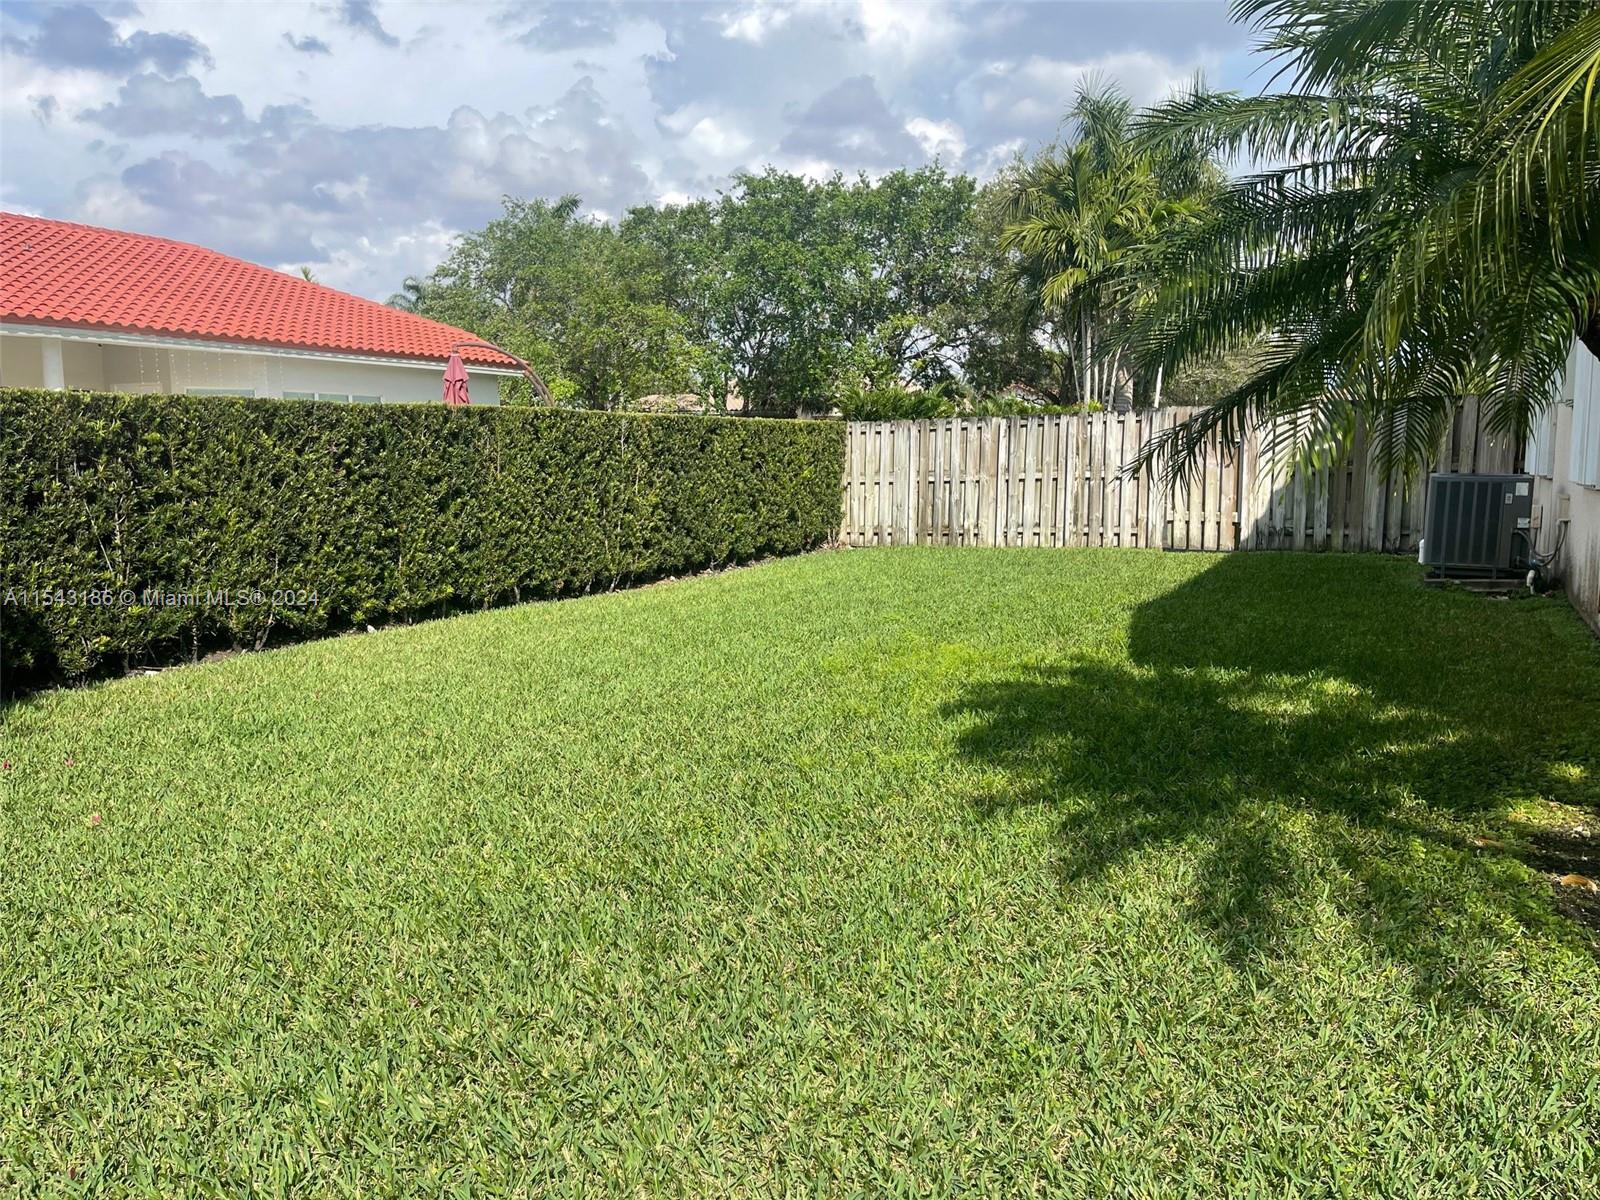 7262 SW 120th Avenue, Miami, Florida, 33183, United States, 5 Bedrooms Bedrooms, ,4 BathroomsBathrooms,Residential,For Sale,7262 SW 120th Avenue,1486070